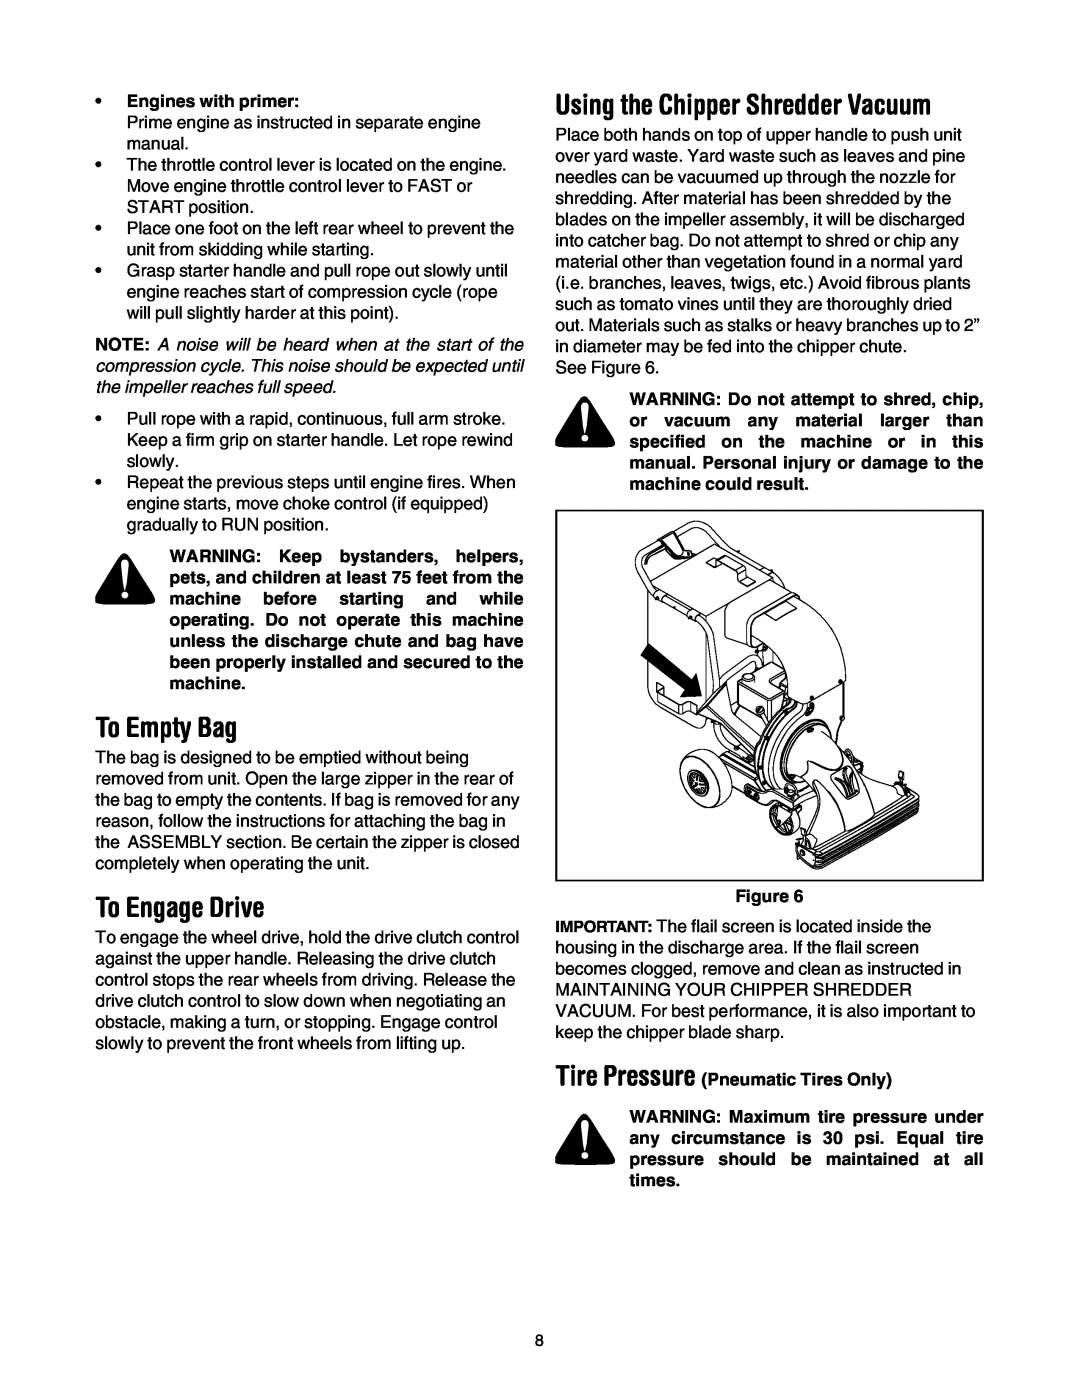 MTD 203 manual To Empty Bag, To Engage Drive, Using the Chipper Shredder Vacuum, Engines with primer 